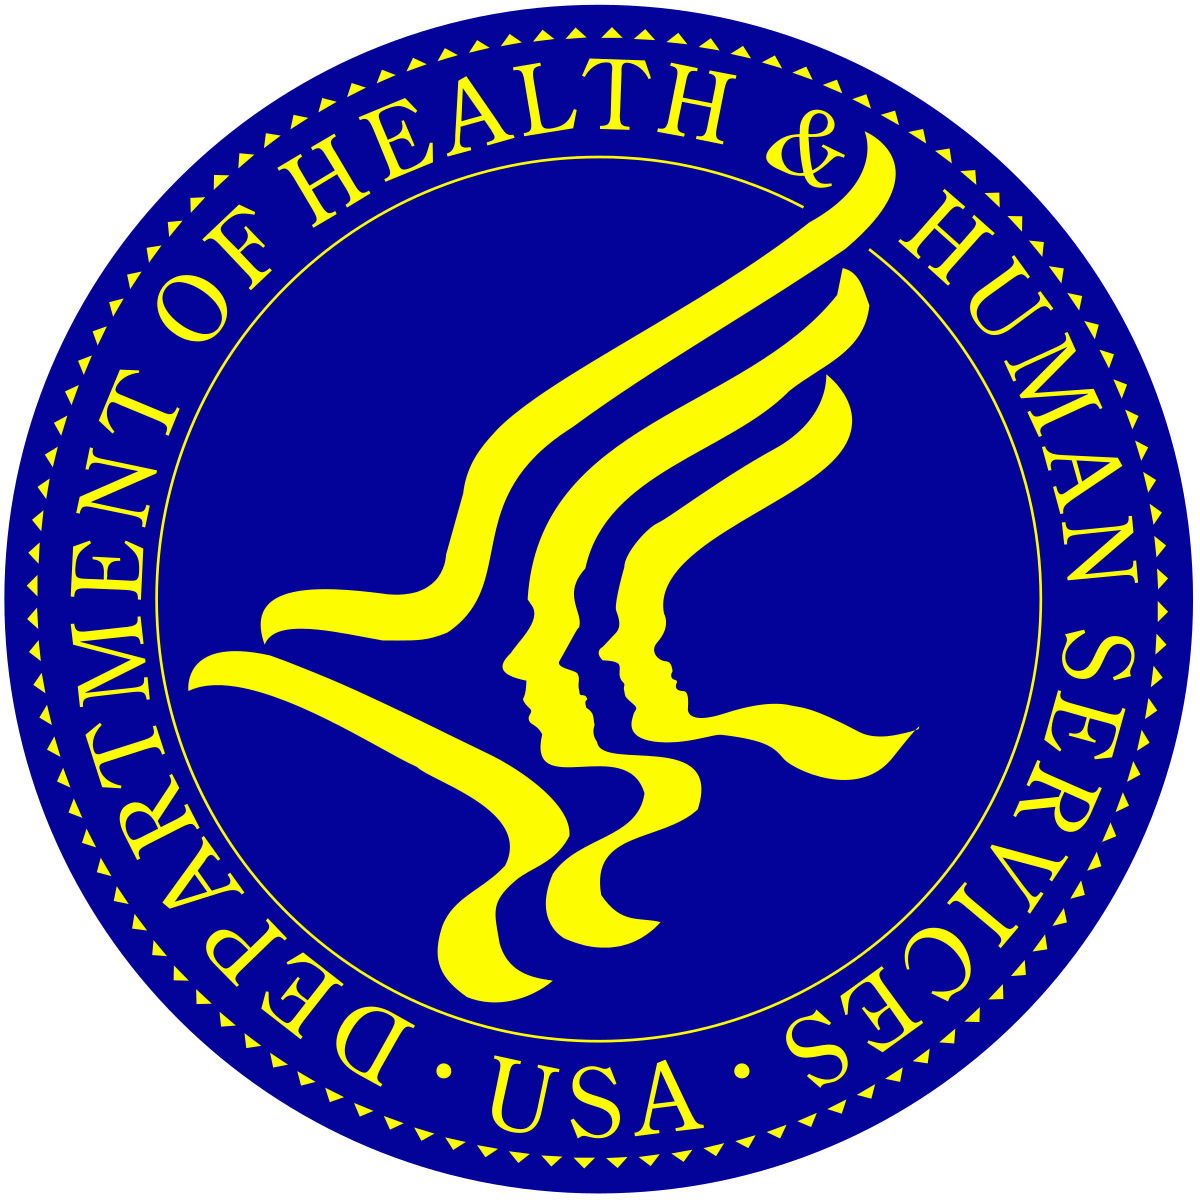 The U.S. Department of Health and Human Services’ Office for Civil Rights' logo